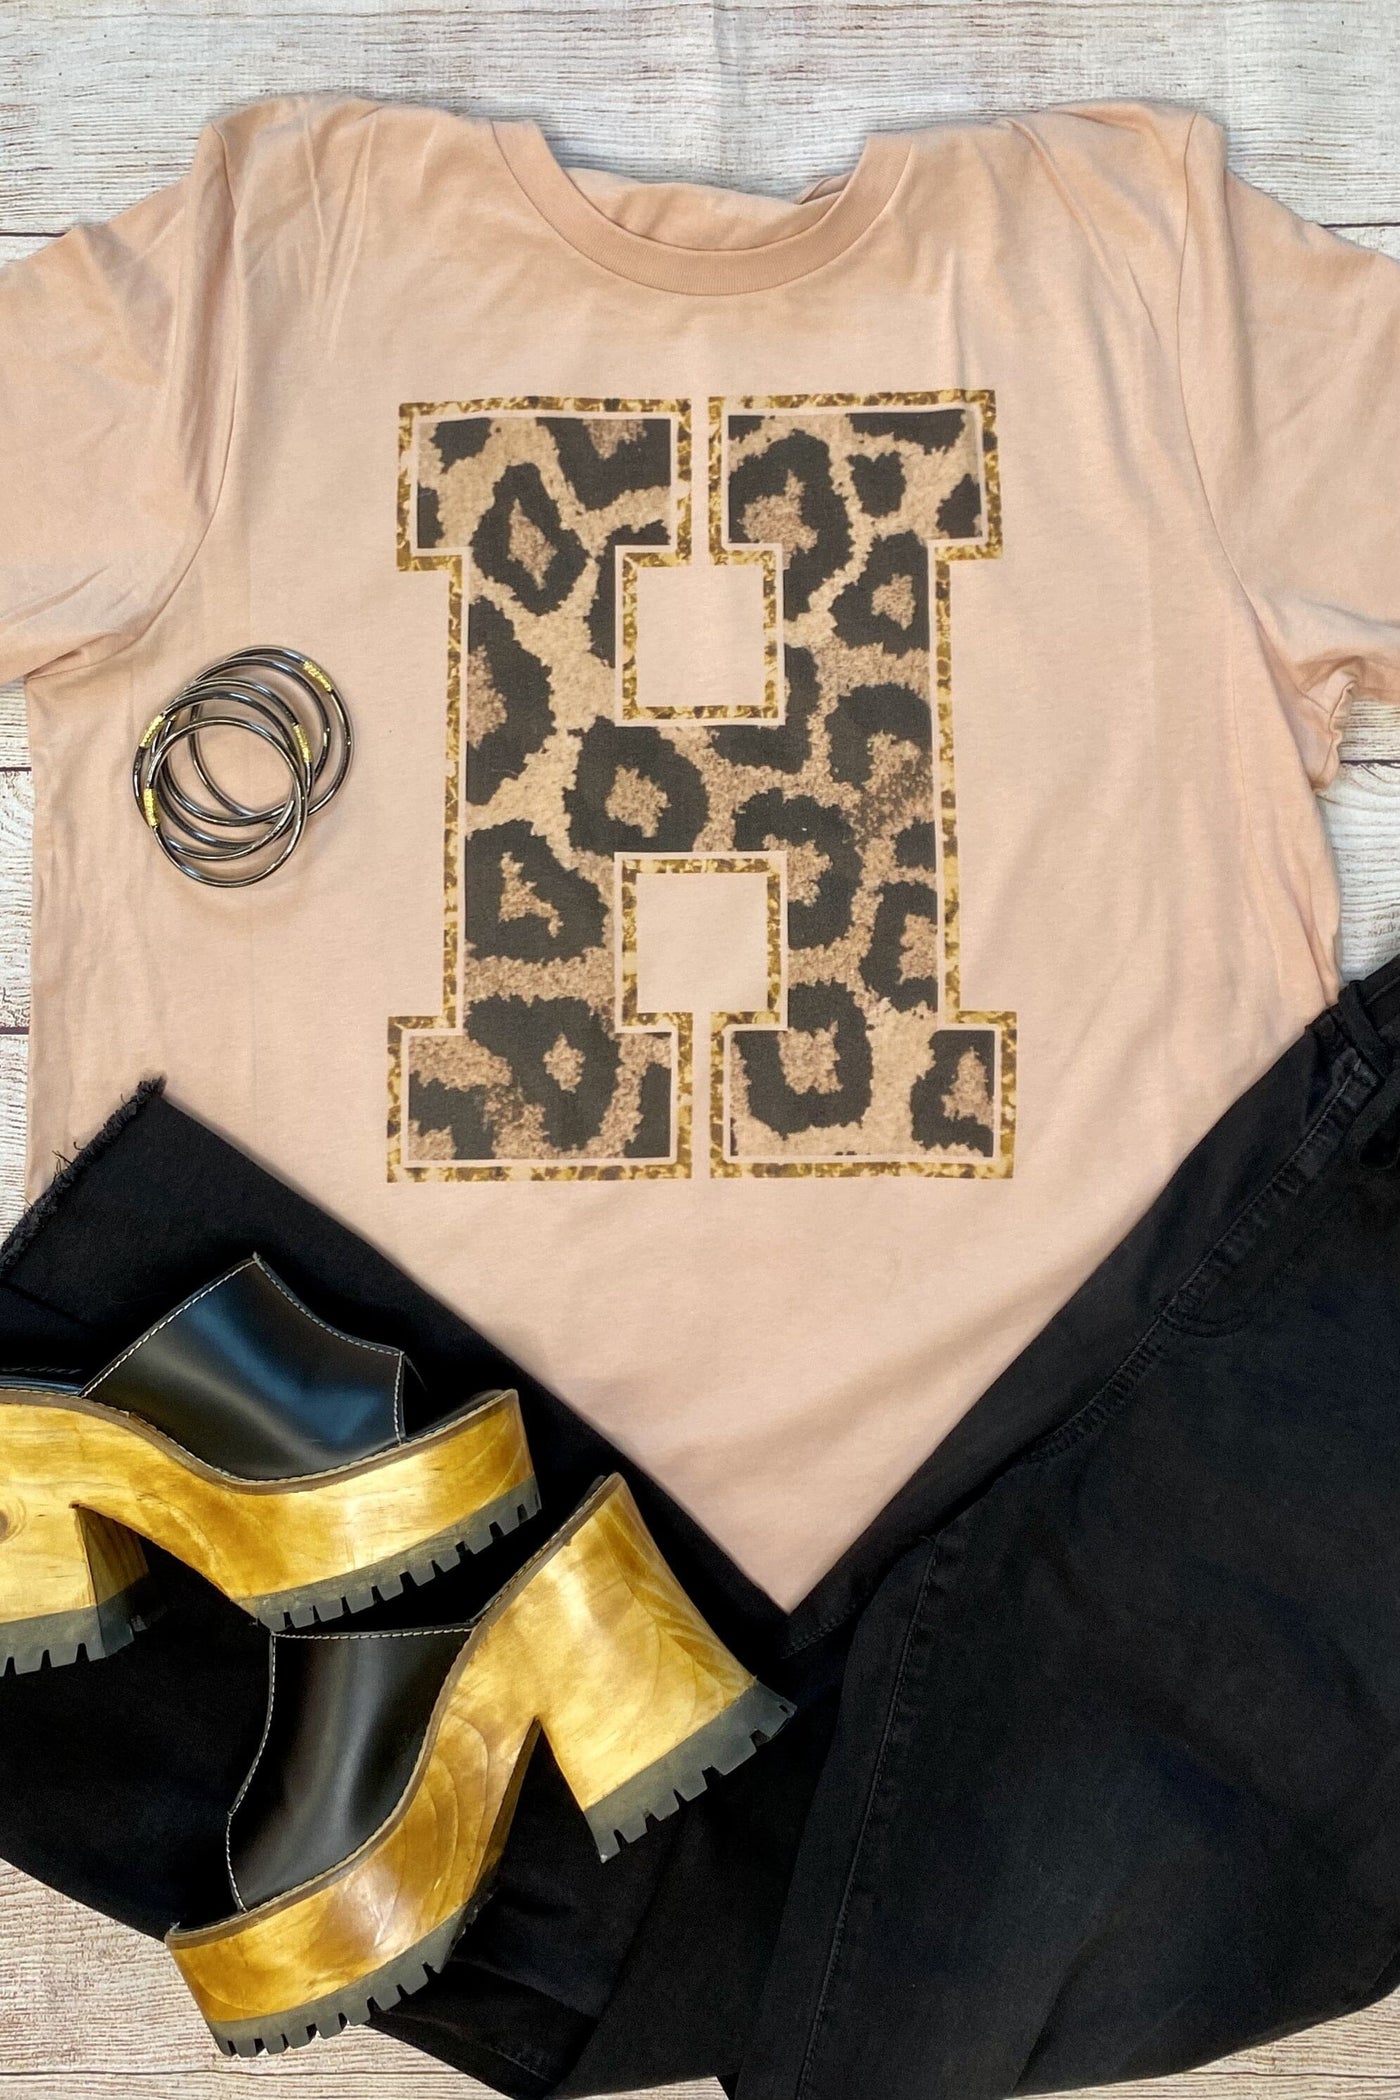 Initials A-M: Blush Graphic Tee graphic tees VCC Small H 